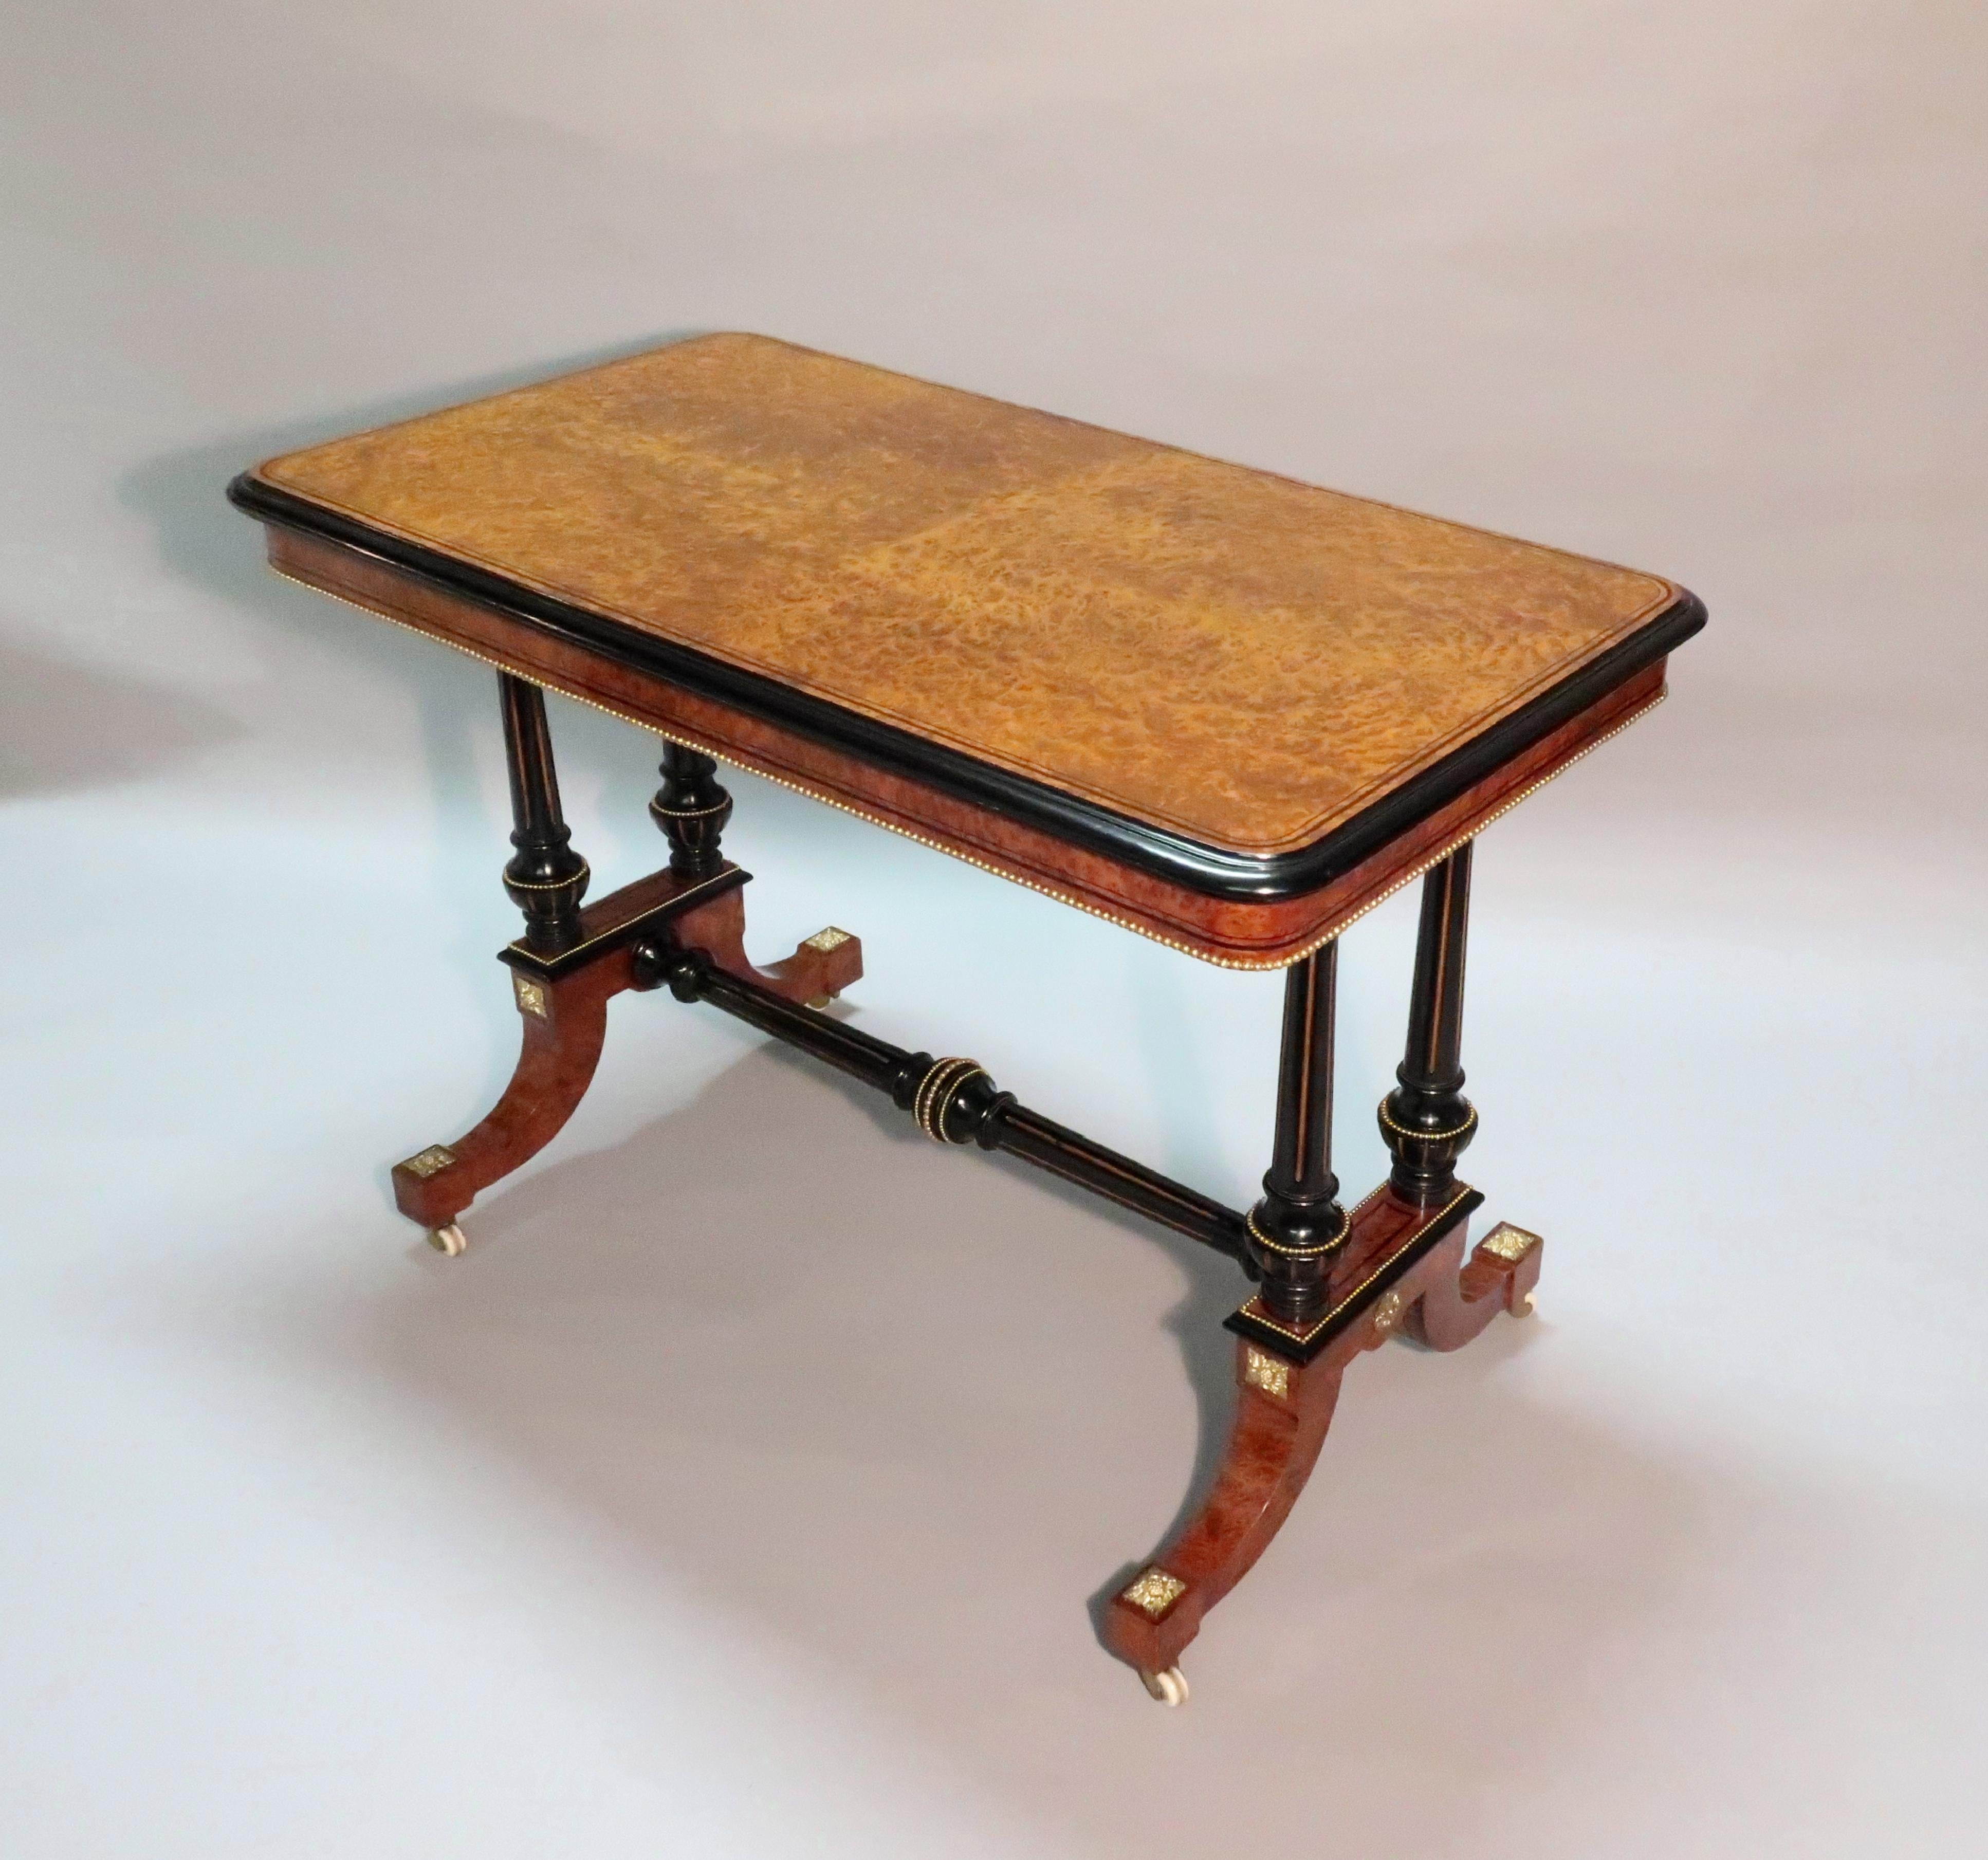 An exceptional quality and rare Victorian amboyna wood and ebonised occasional or side table with ebony string inlay to the top and frieze. The table has gilt fluted columns and stretcher with beaded ormolu mouldings and mounts.
 
The table is